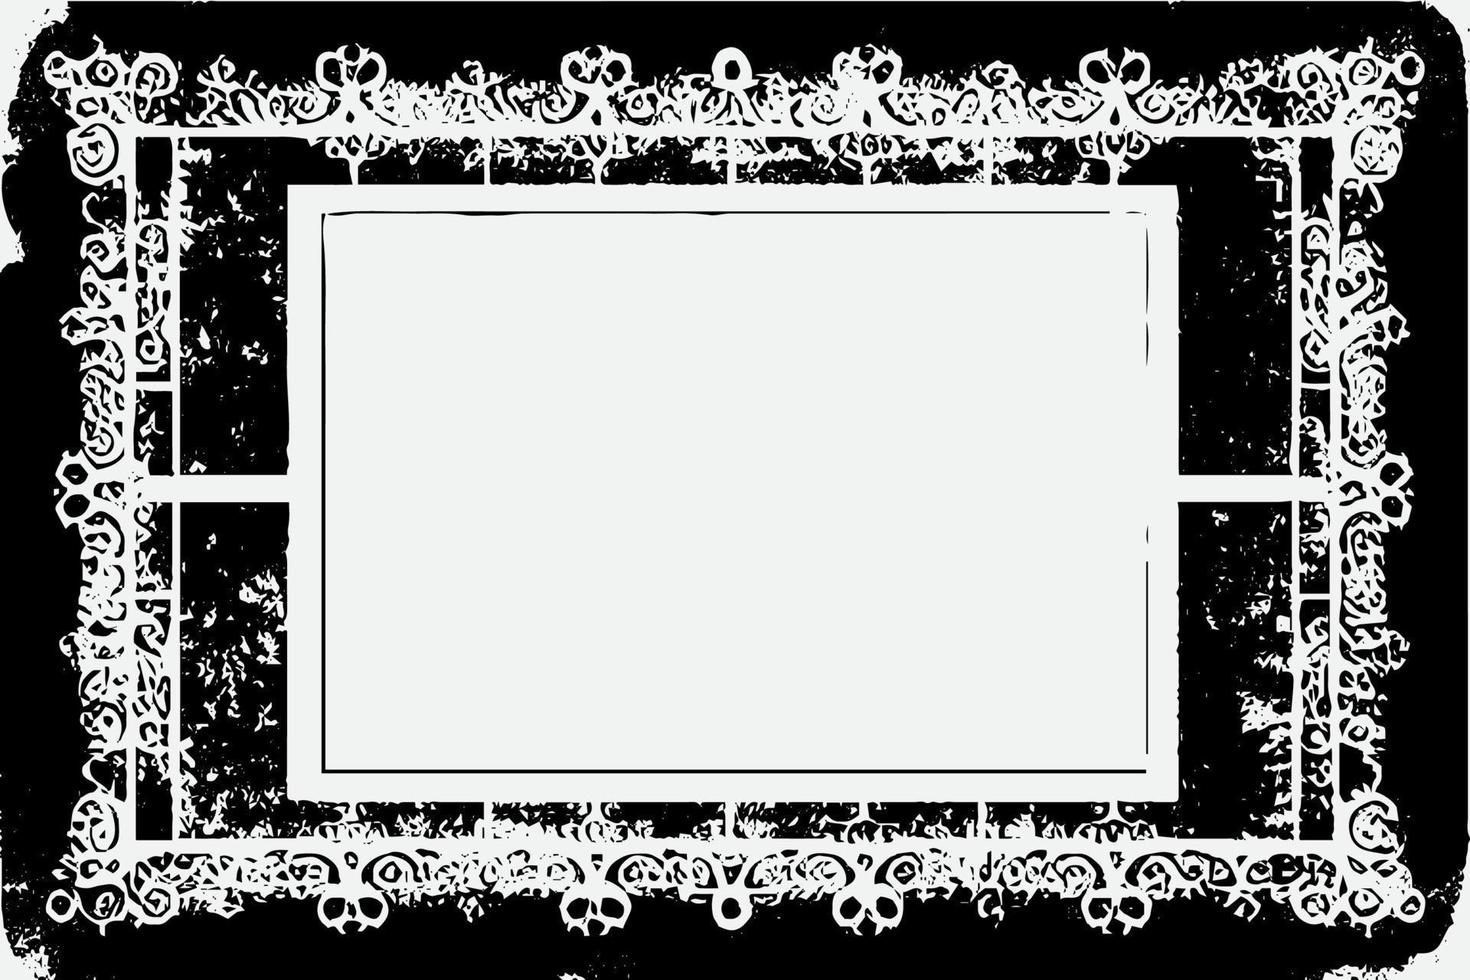 square frame with Grunge black ink ornament around the edges, white background in vector EPS format.